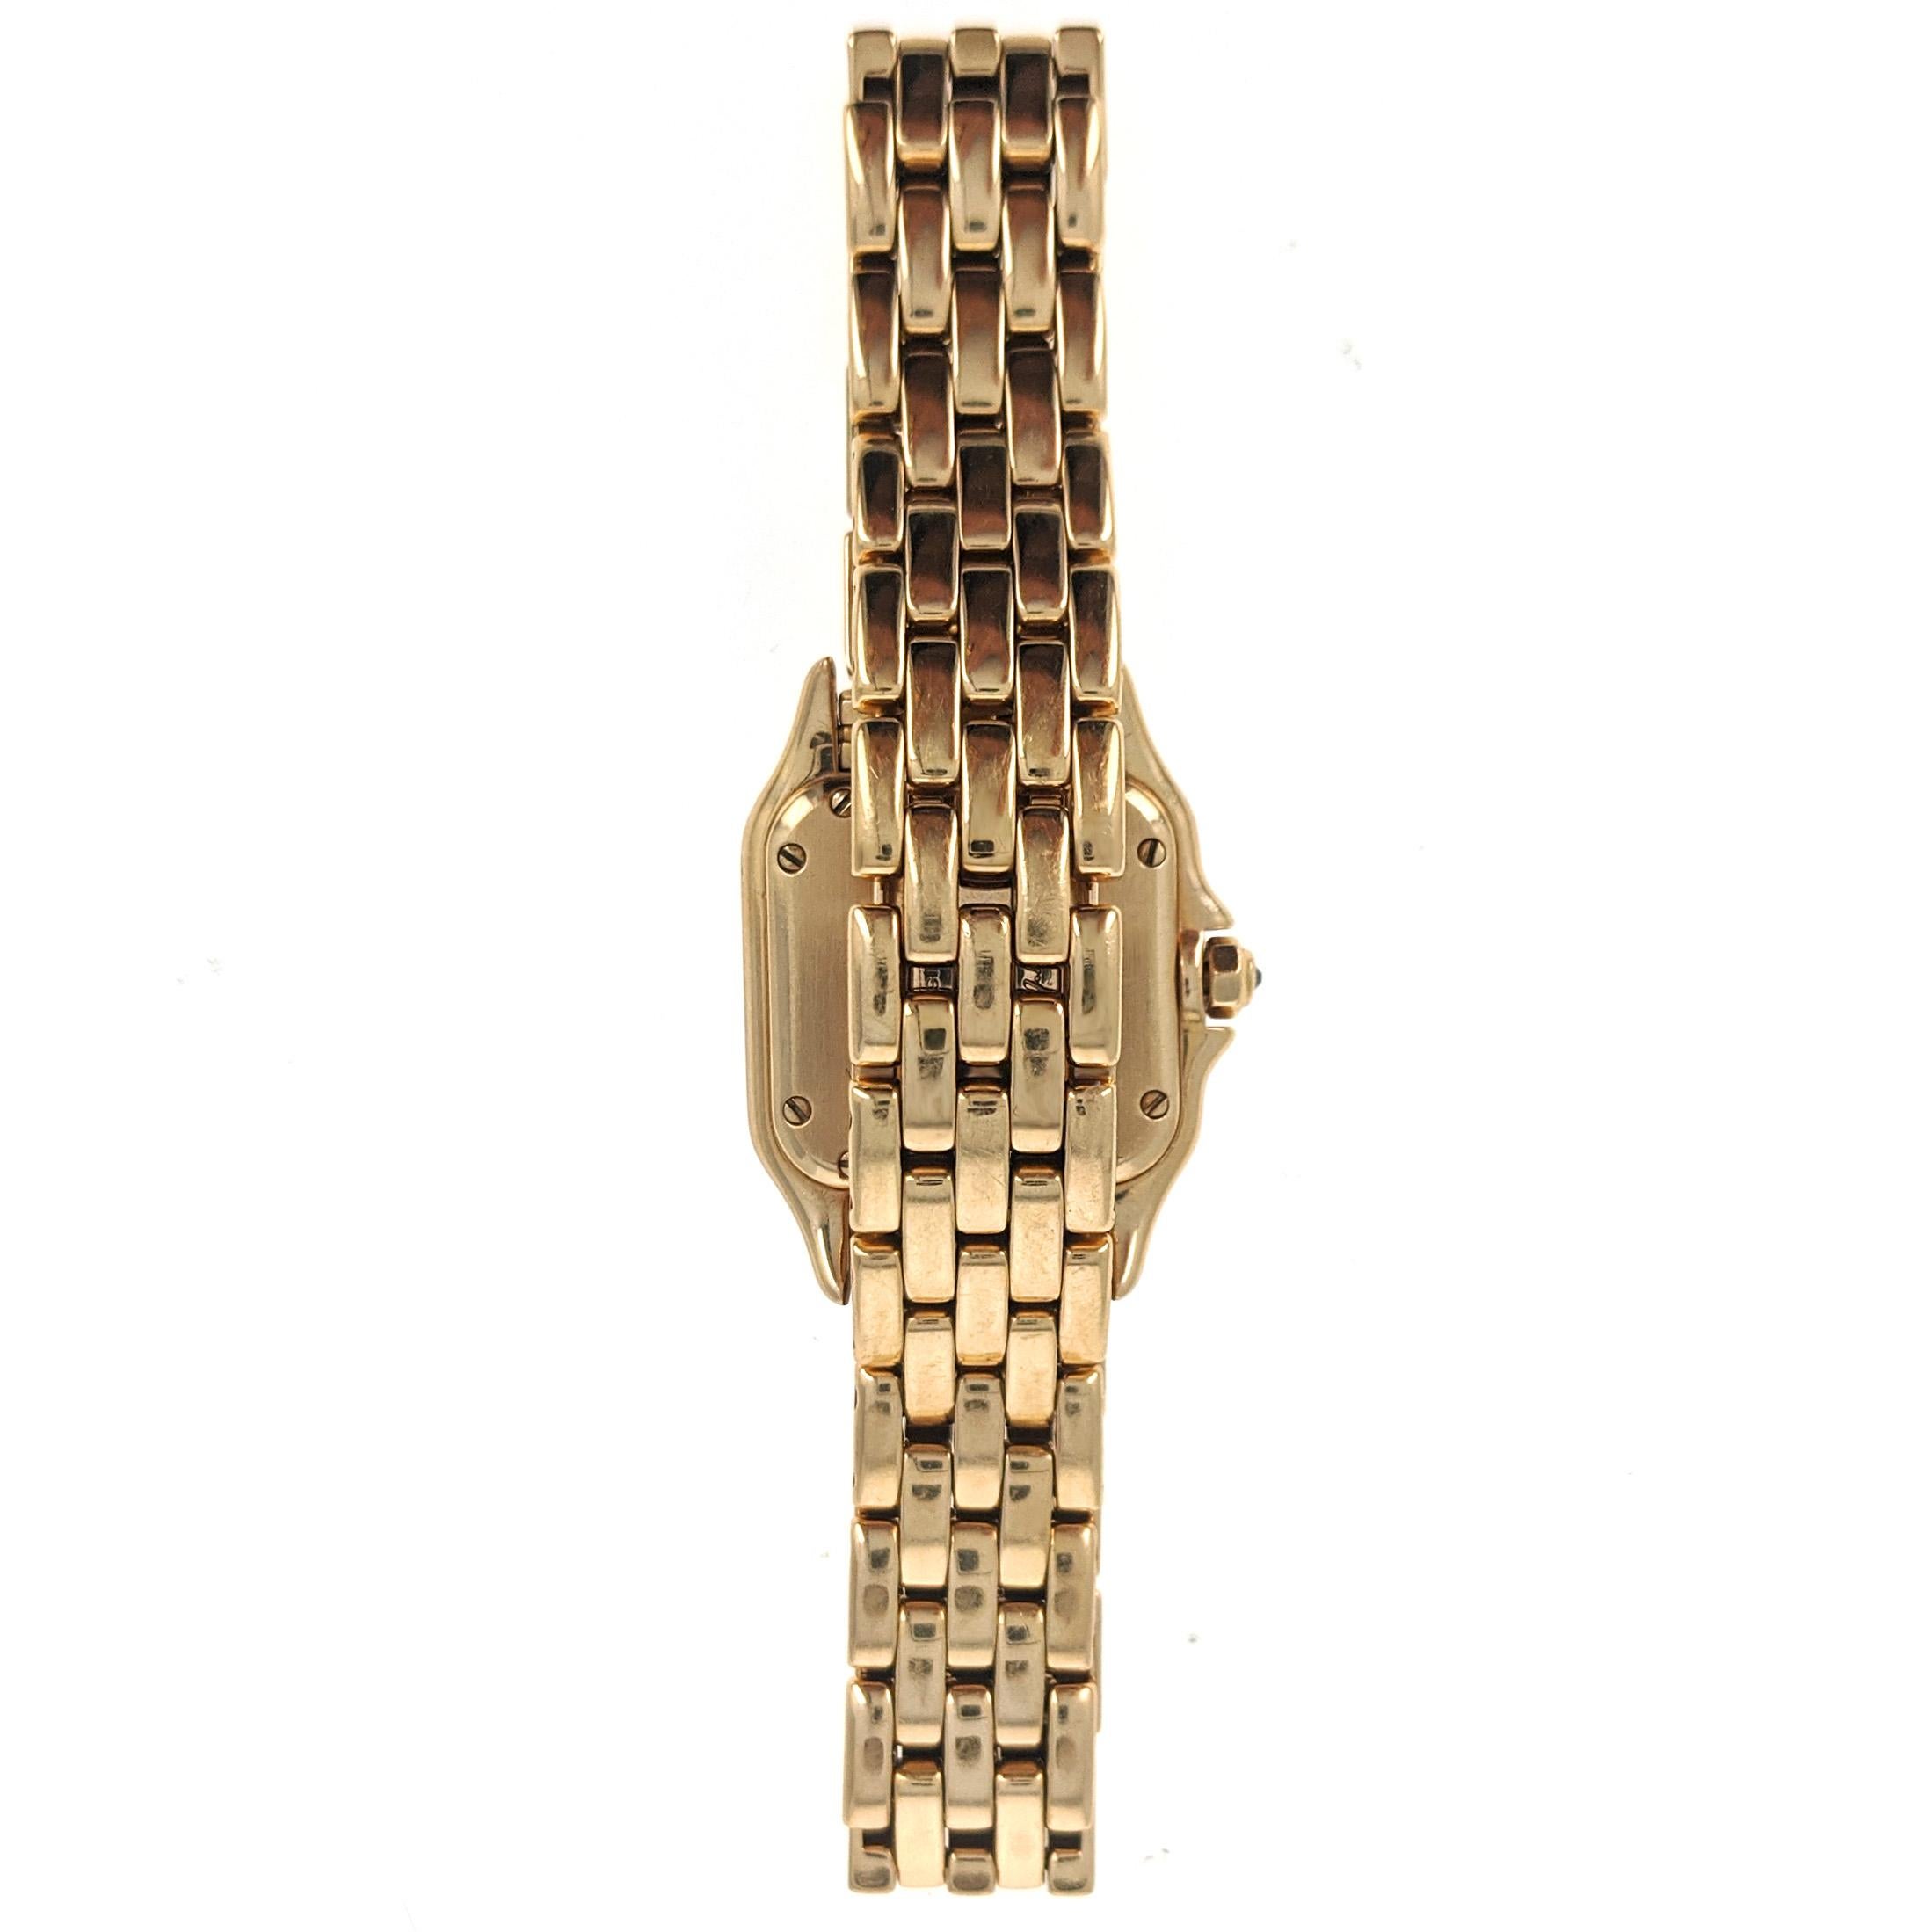 The small model with a quartz movement and case in 18K yellow gold factory-set with approximately 1 carat of factory-set round diamonds. Crown set with a diamond, ivory dial, blued-steel sword-shaped hands, 18K yellow gold bracelet with hidden